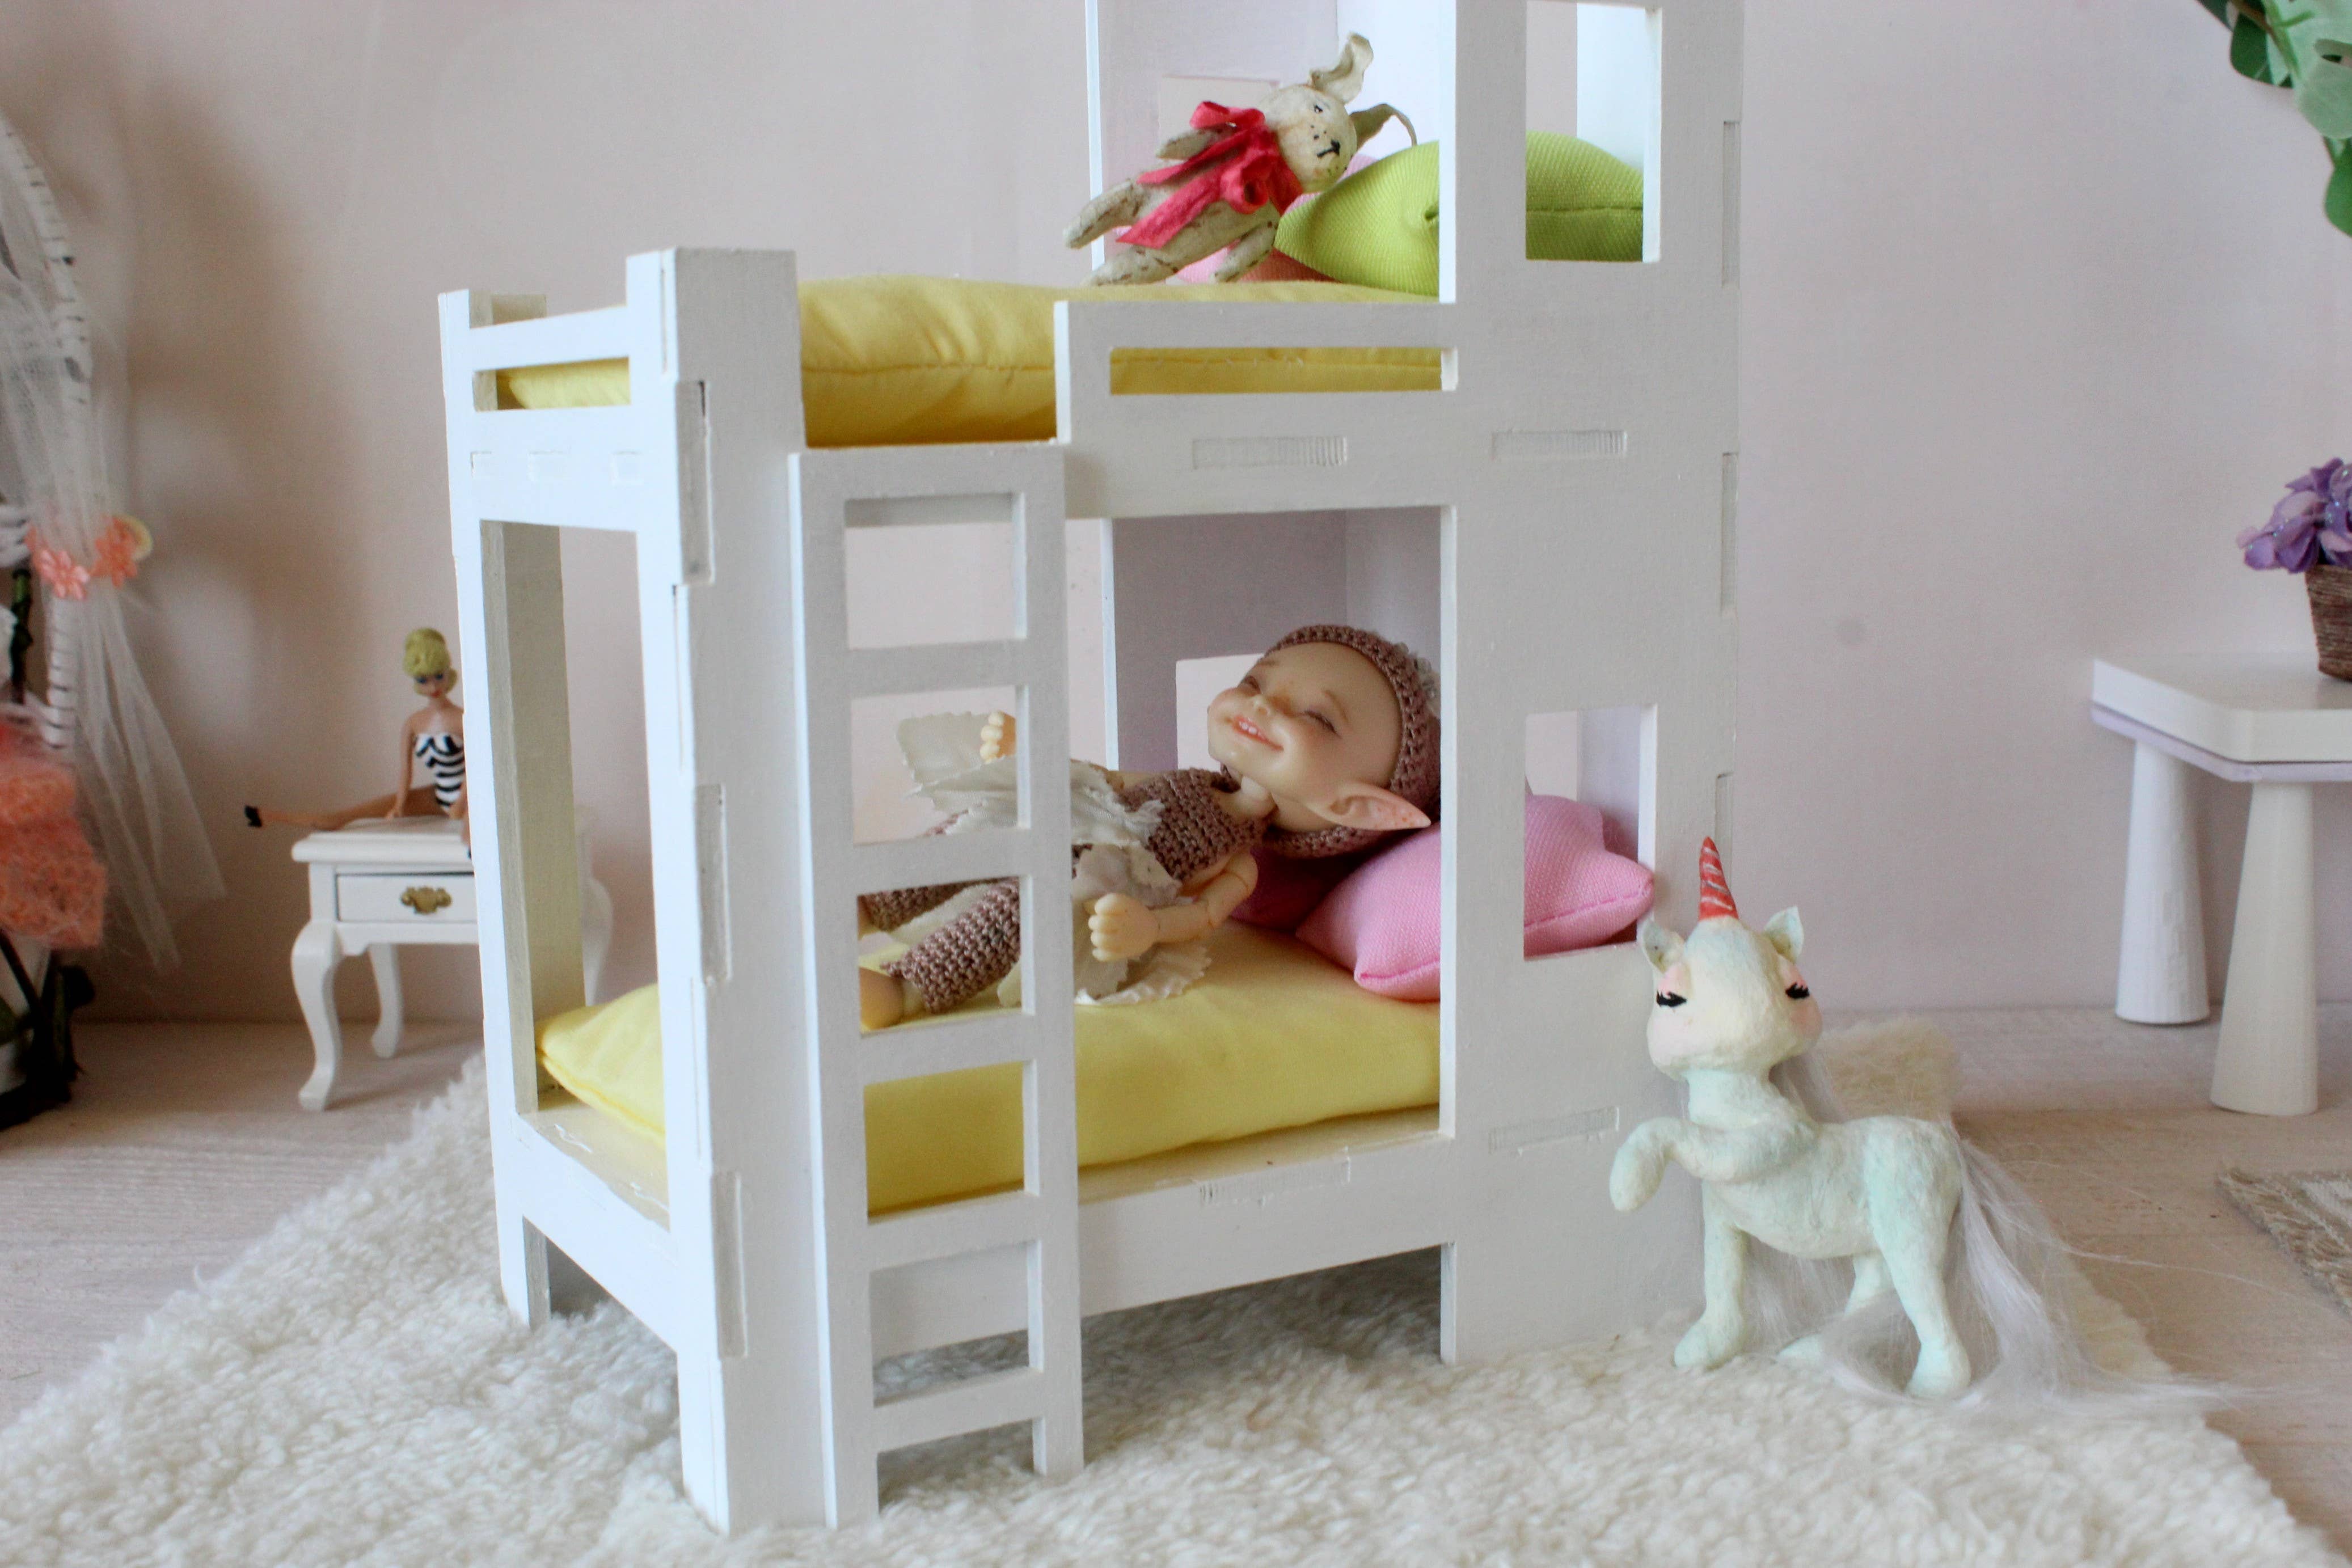 Miniature bunk bed 1/12 scale dollhouse furniture. White woo